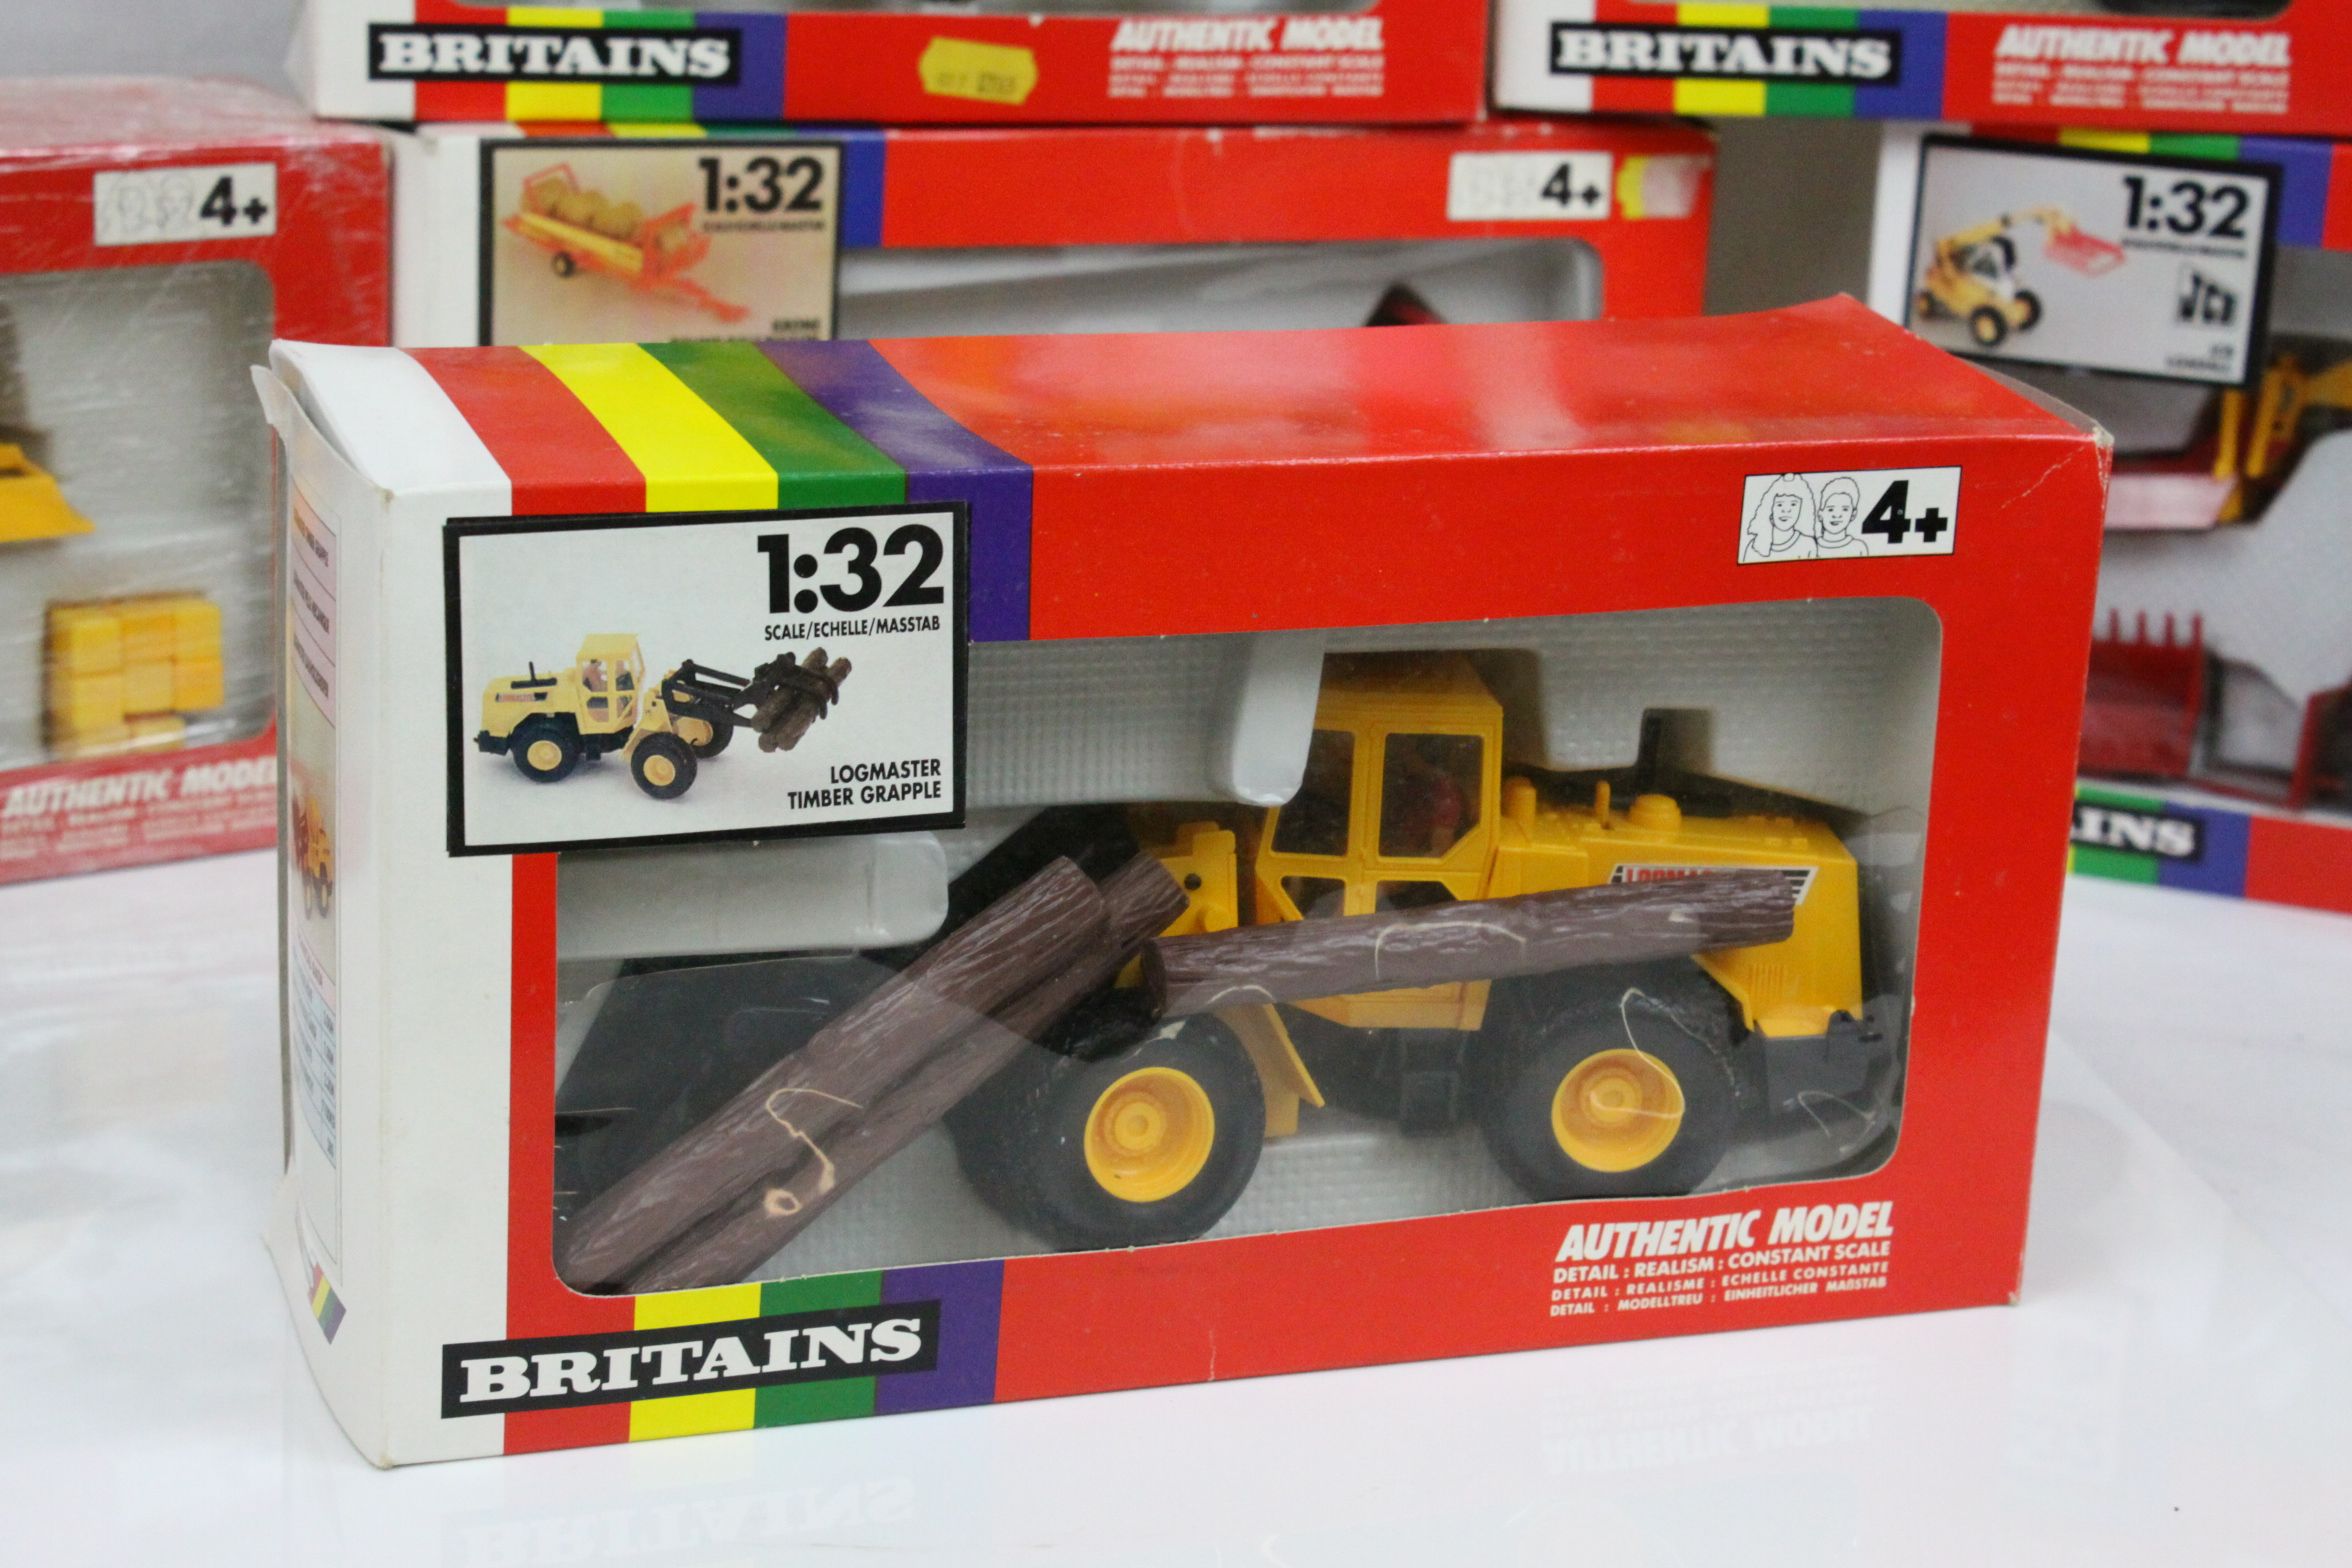 16 Boxed 1:32 Britains farming models to include 9566, 9559, 9539, 9548, 9547, 9574, 9509, 9519, - Image 15 of 27